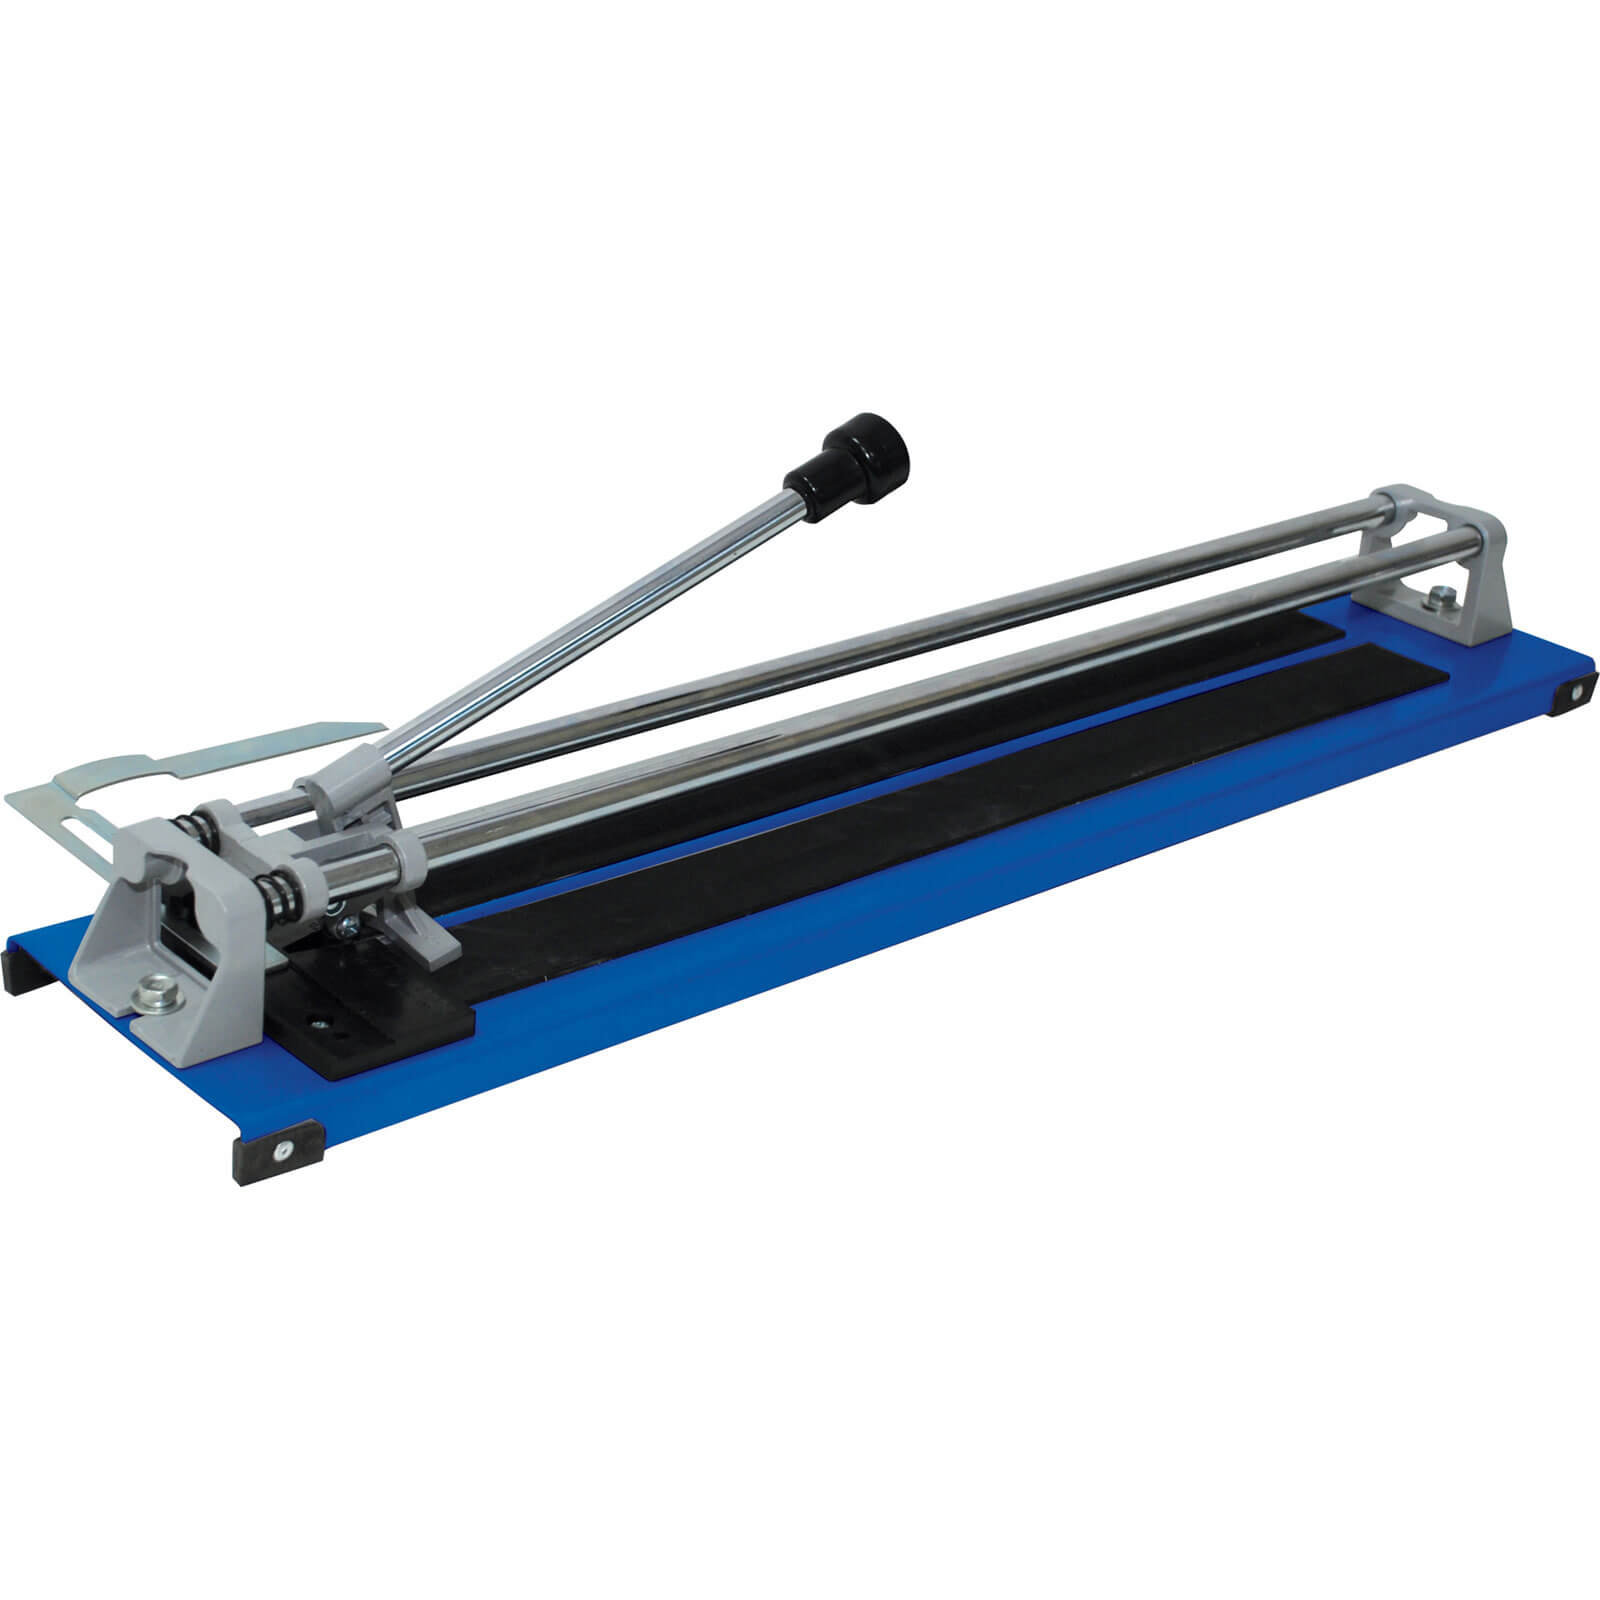 Image of Vitrex Manual Flat Bed Tile Cutter